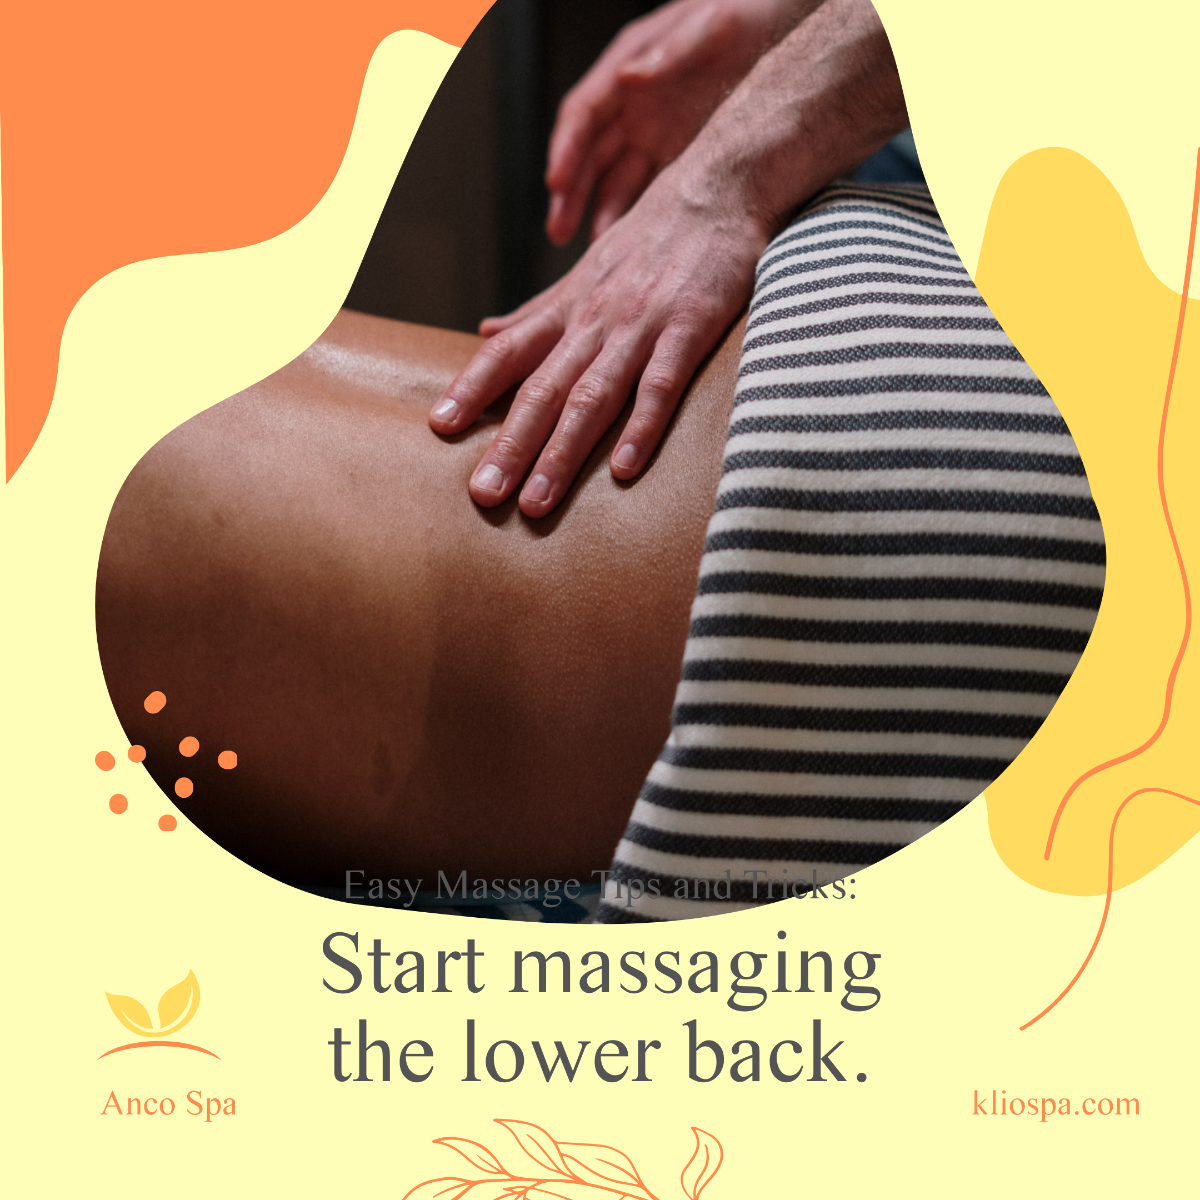 Free Easy Massage Tips And Tricks Post, Instagram, Facebook Template